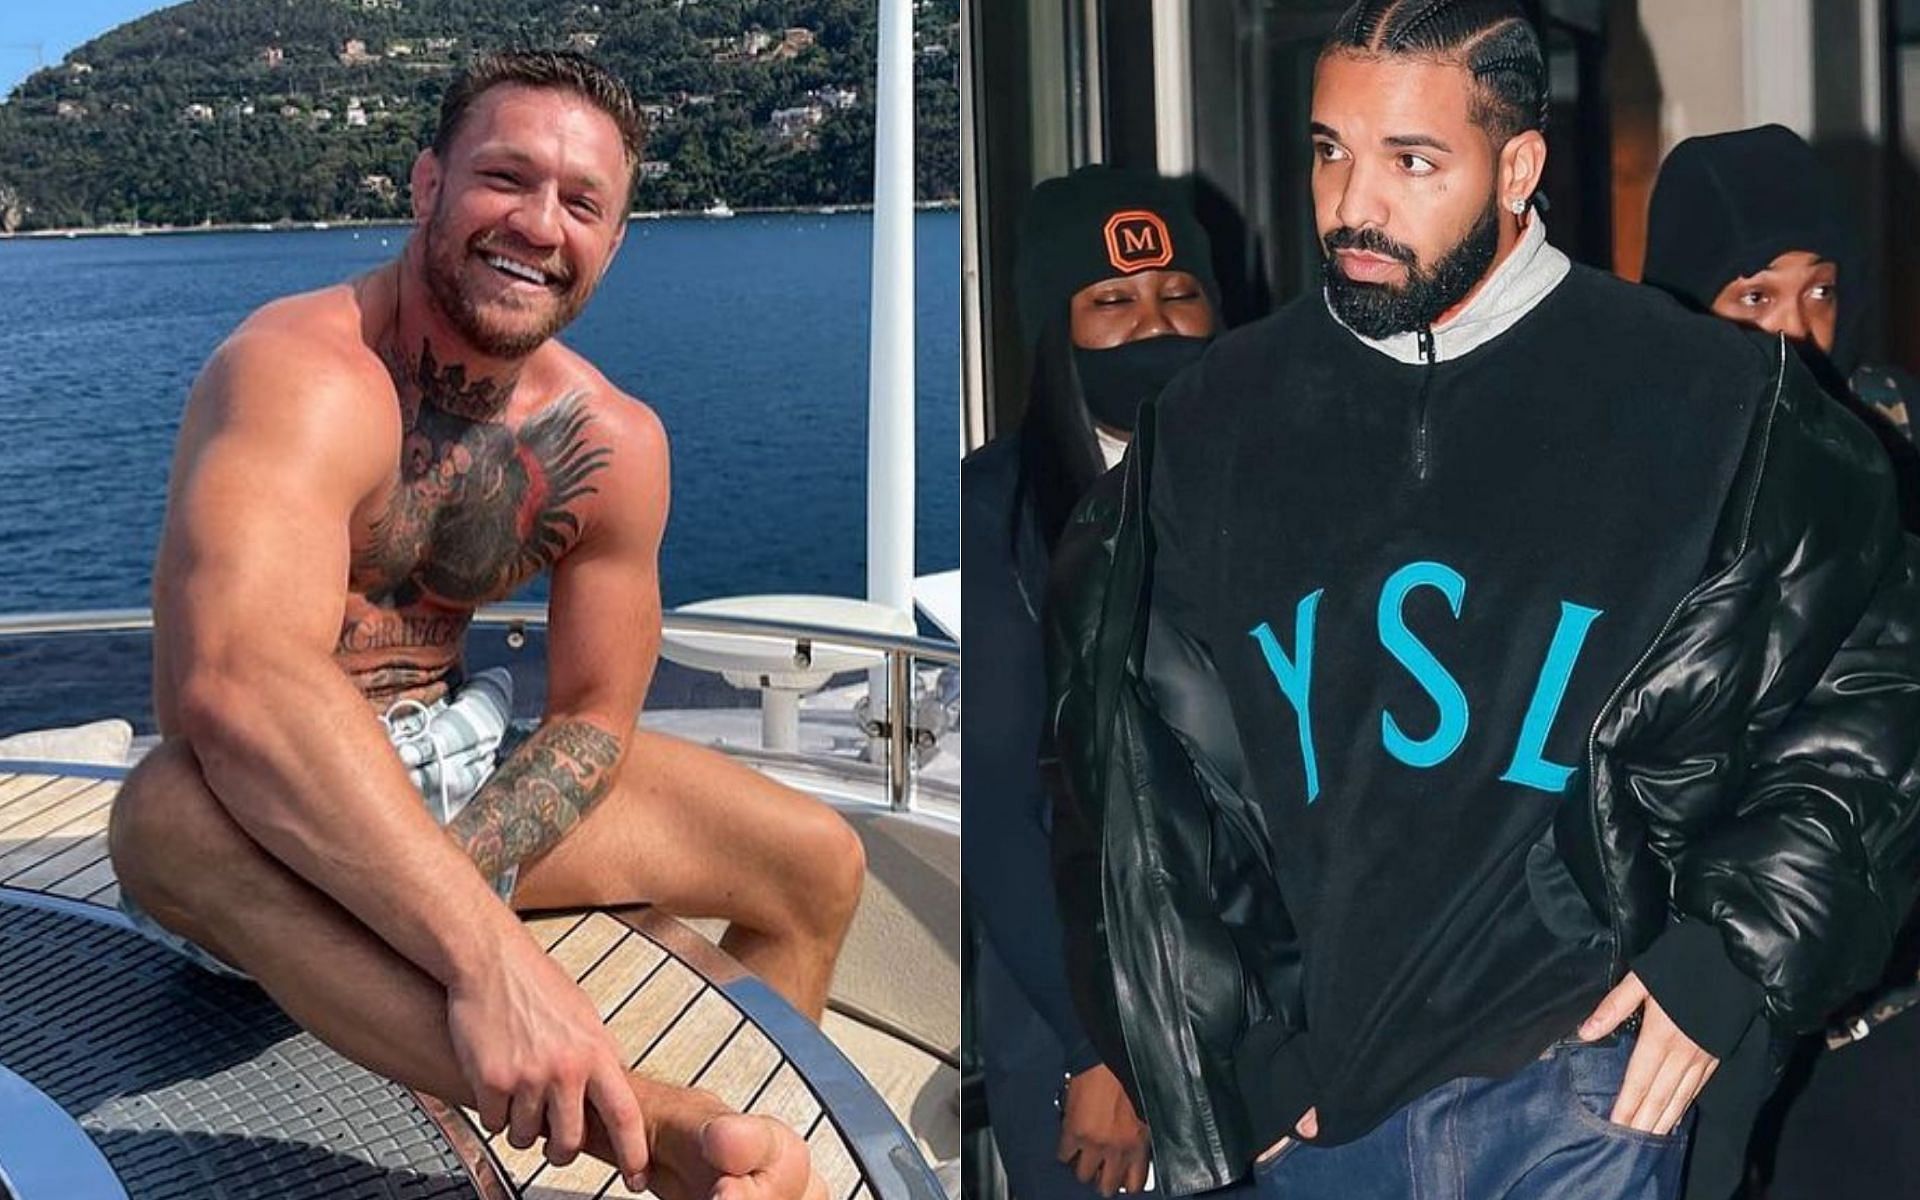 Conor McGregor (left) and Drake (right) [Image credits: @thenotoriousmma and @champagnepapi on Instagram]